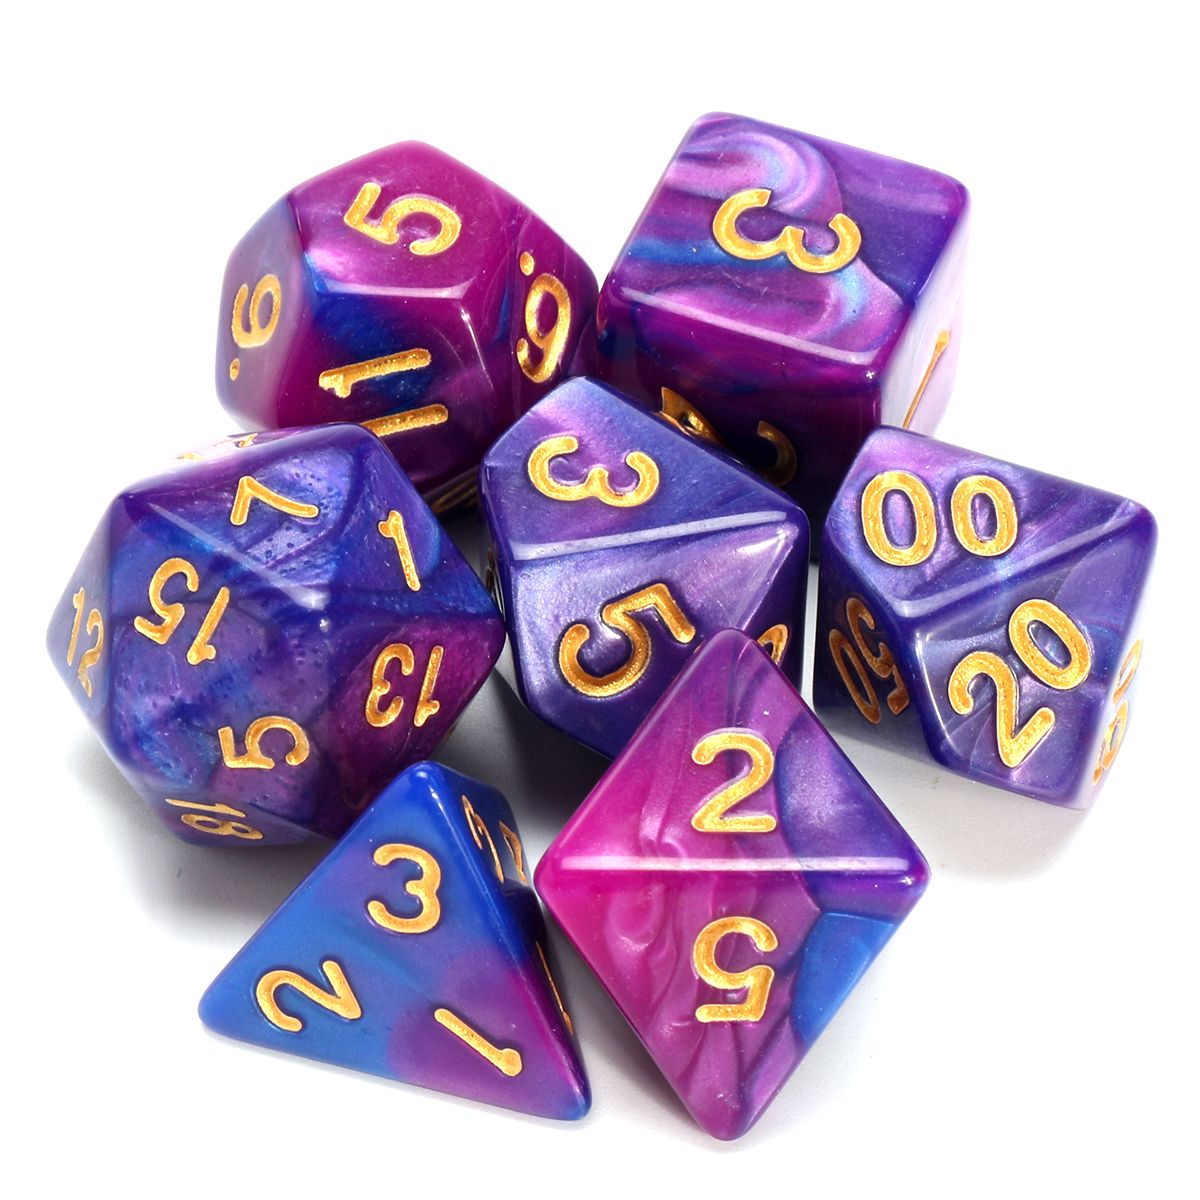 Polyhedral-Dice-PurpleampBlue-7-Piece-DampD-RPG-MTG-Party-Game-Toy-Set-1231736